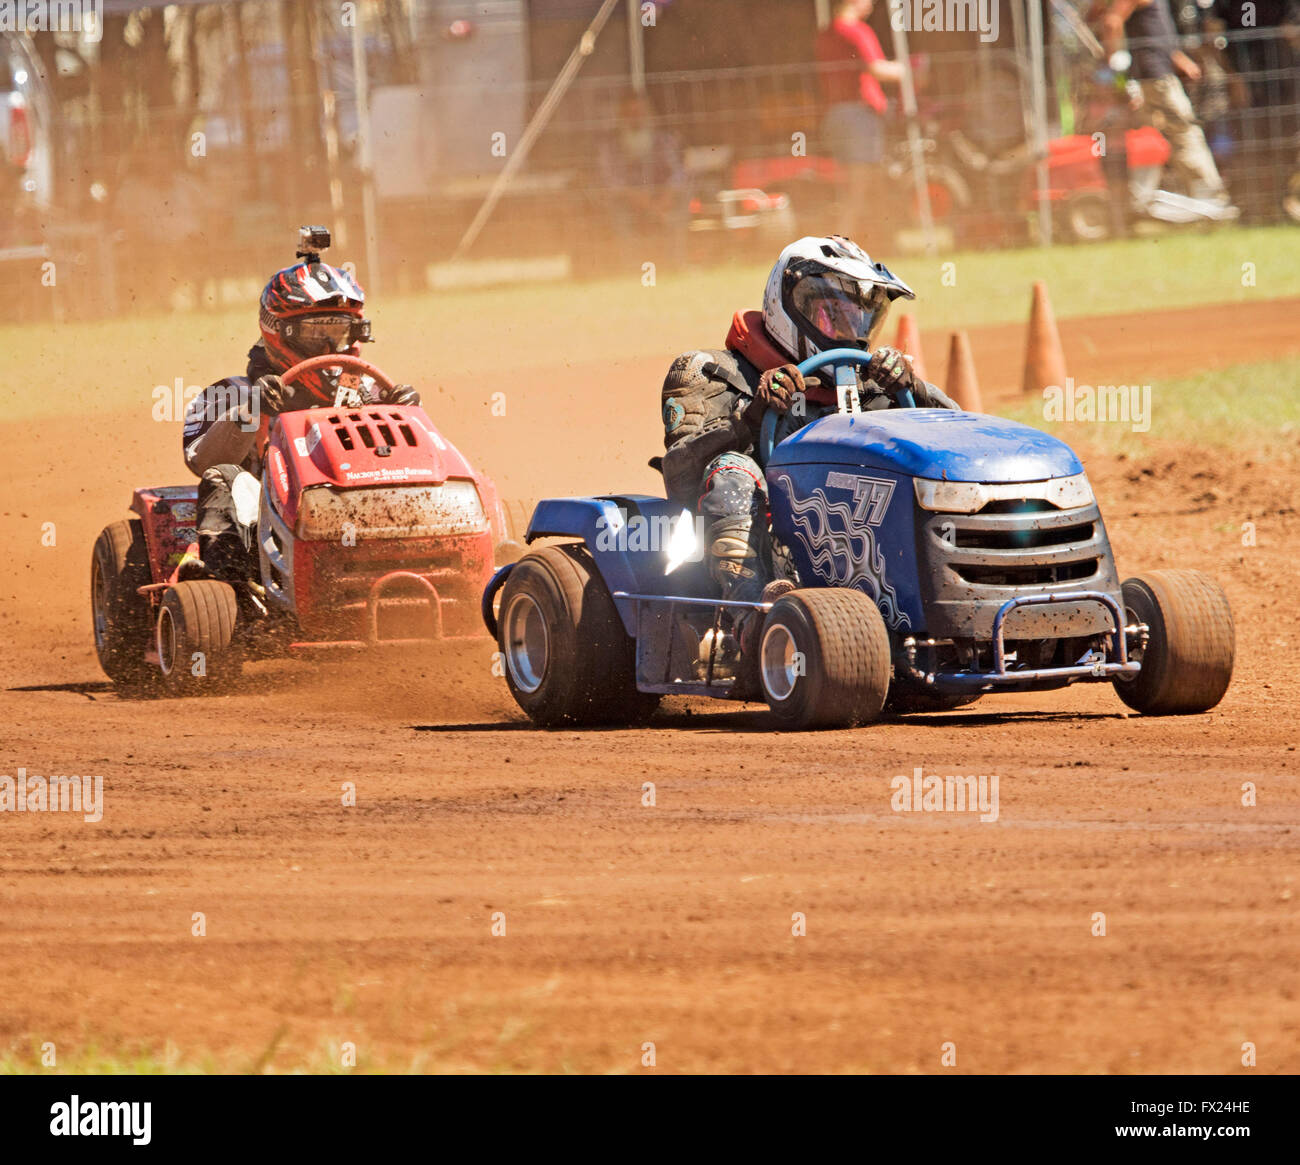 Two men with helmets &safety clothing driving ride-on mowers on dusty track competing in unusual Australian motor racing sport Stock Photo